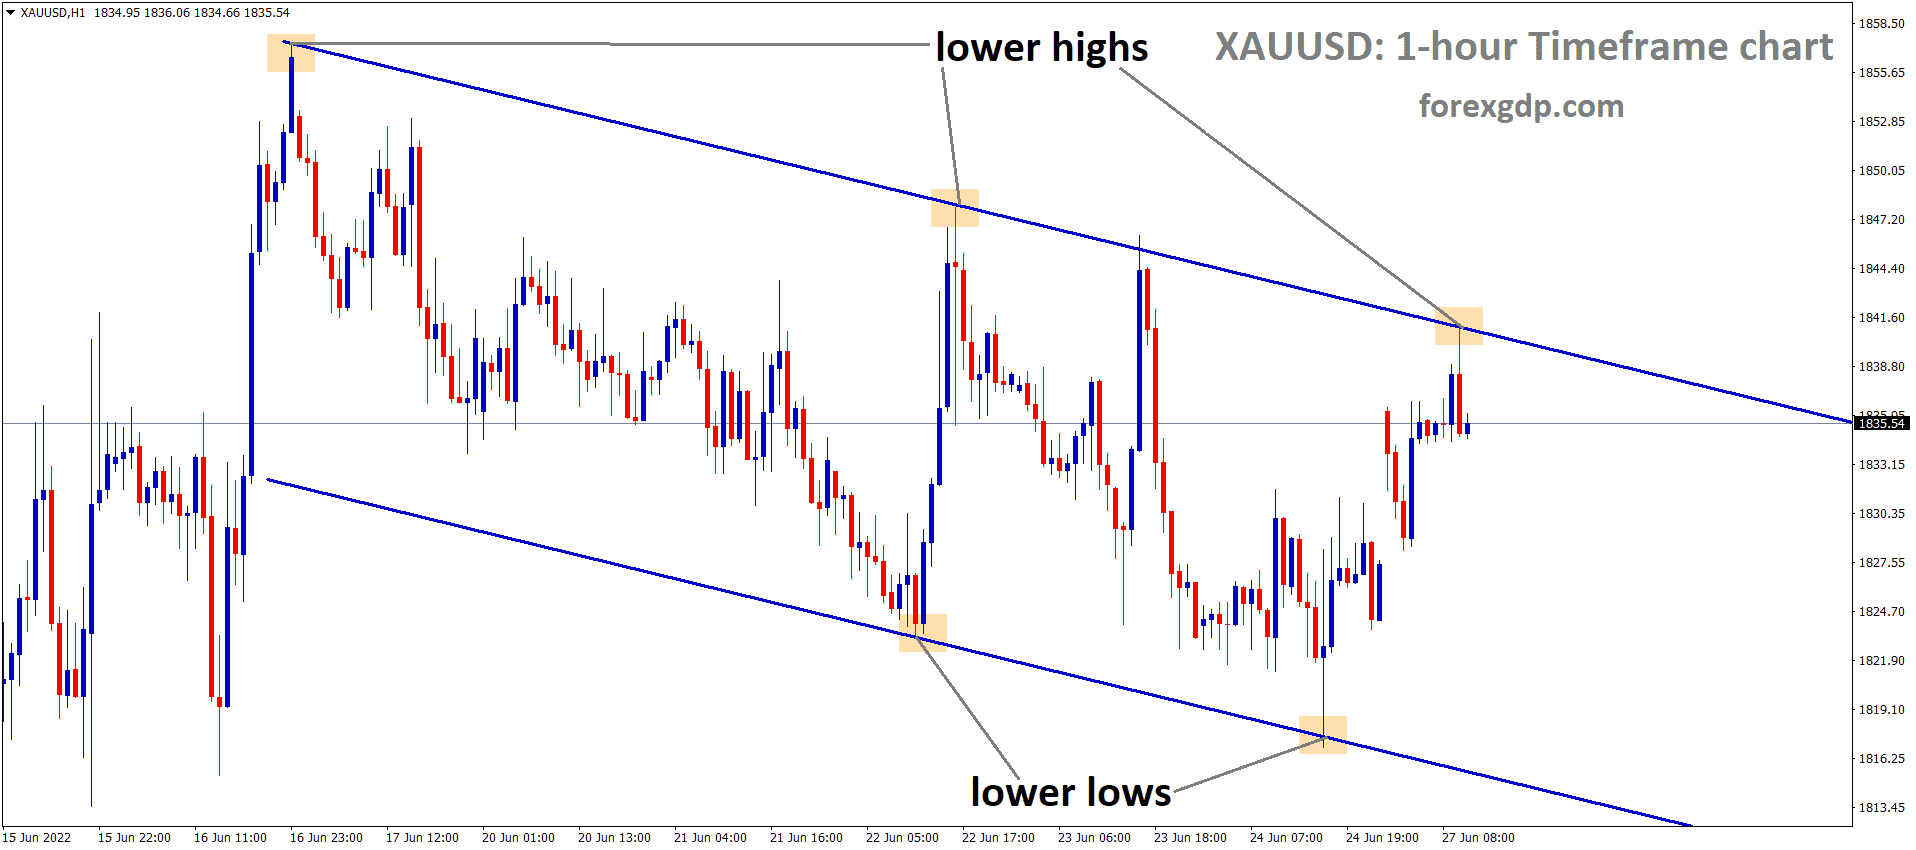 XAUUSD H1 Time Frame Analysis Market is moving in the Descending channel and the Market has reached the Lower high area of the channel